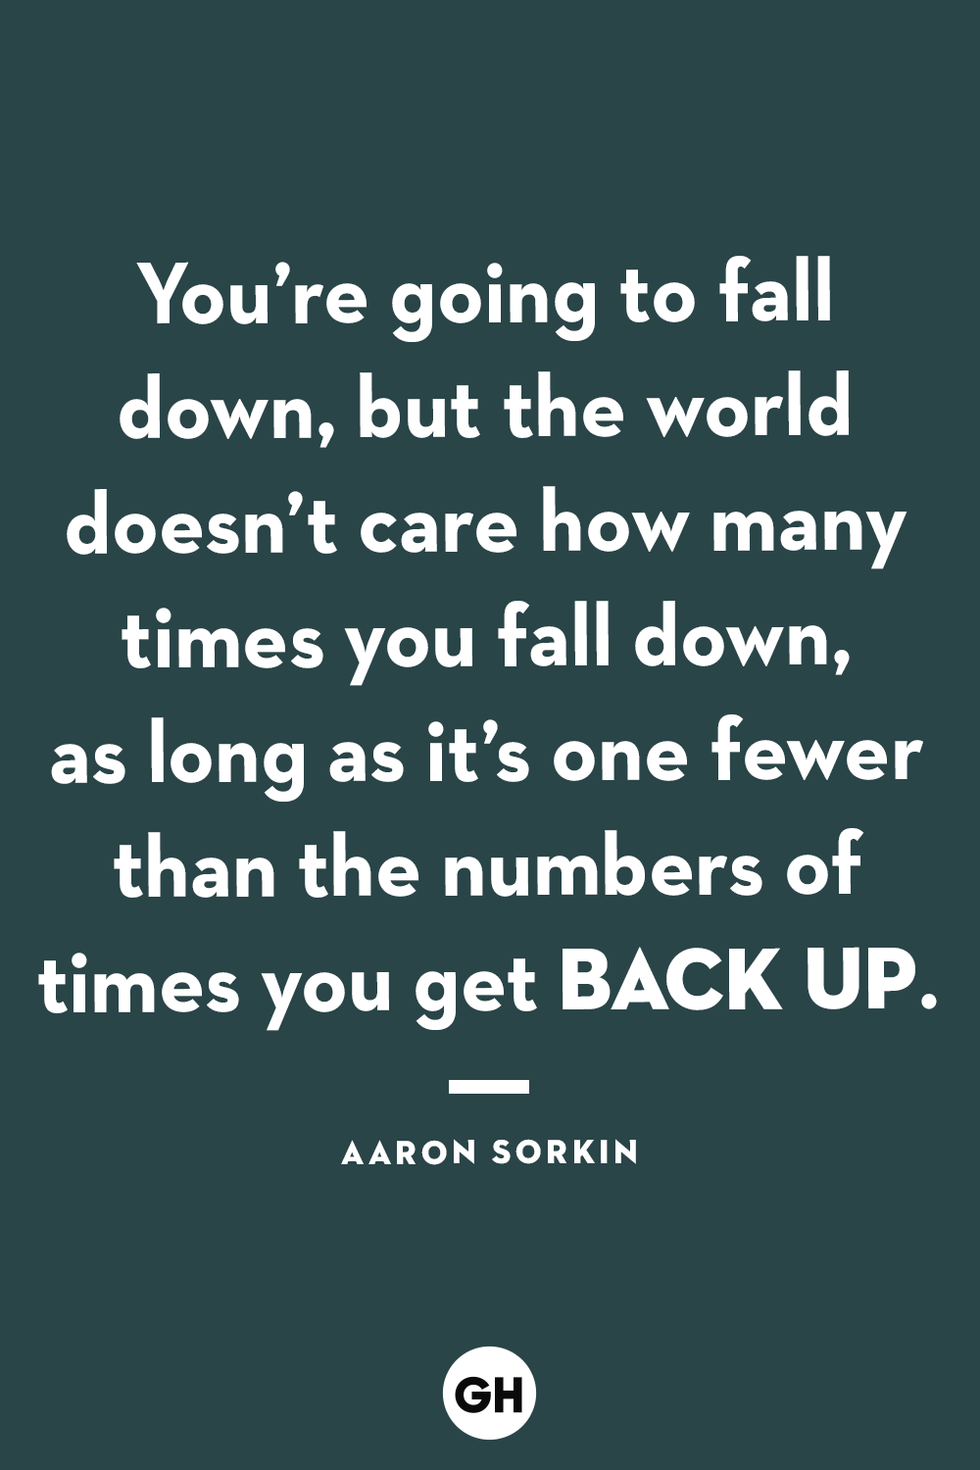 funny graduation quote by aaron sorkin